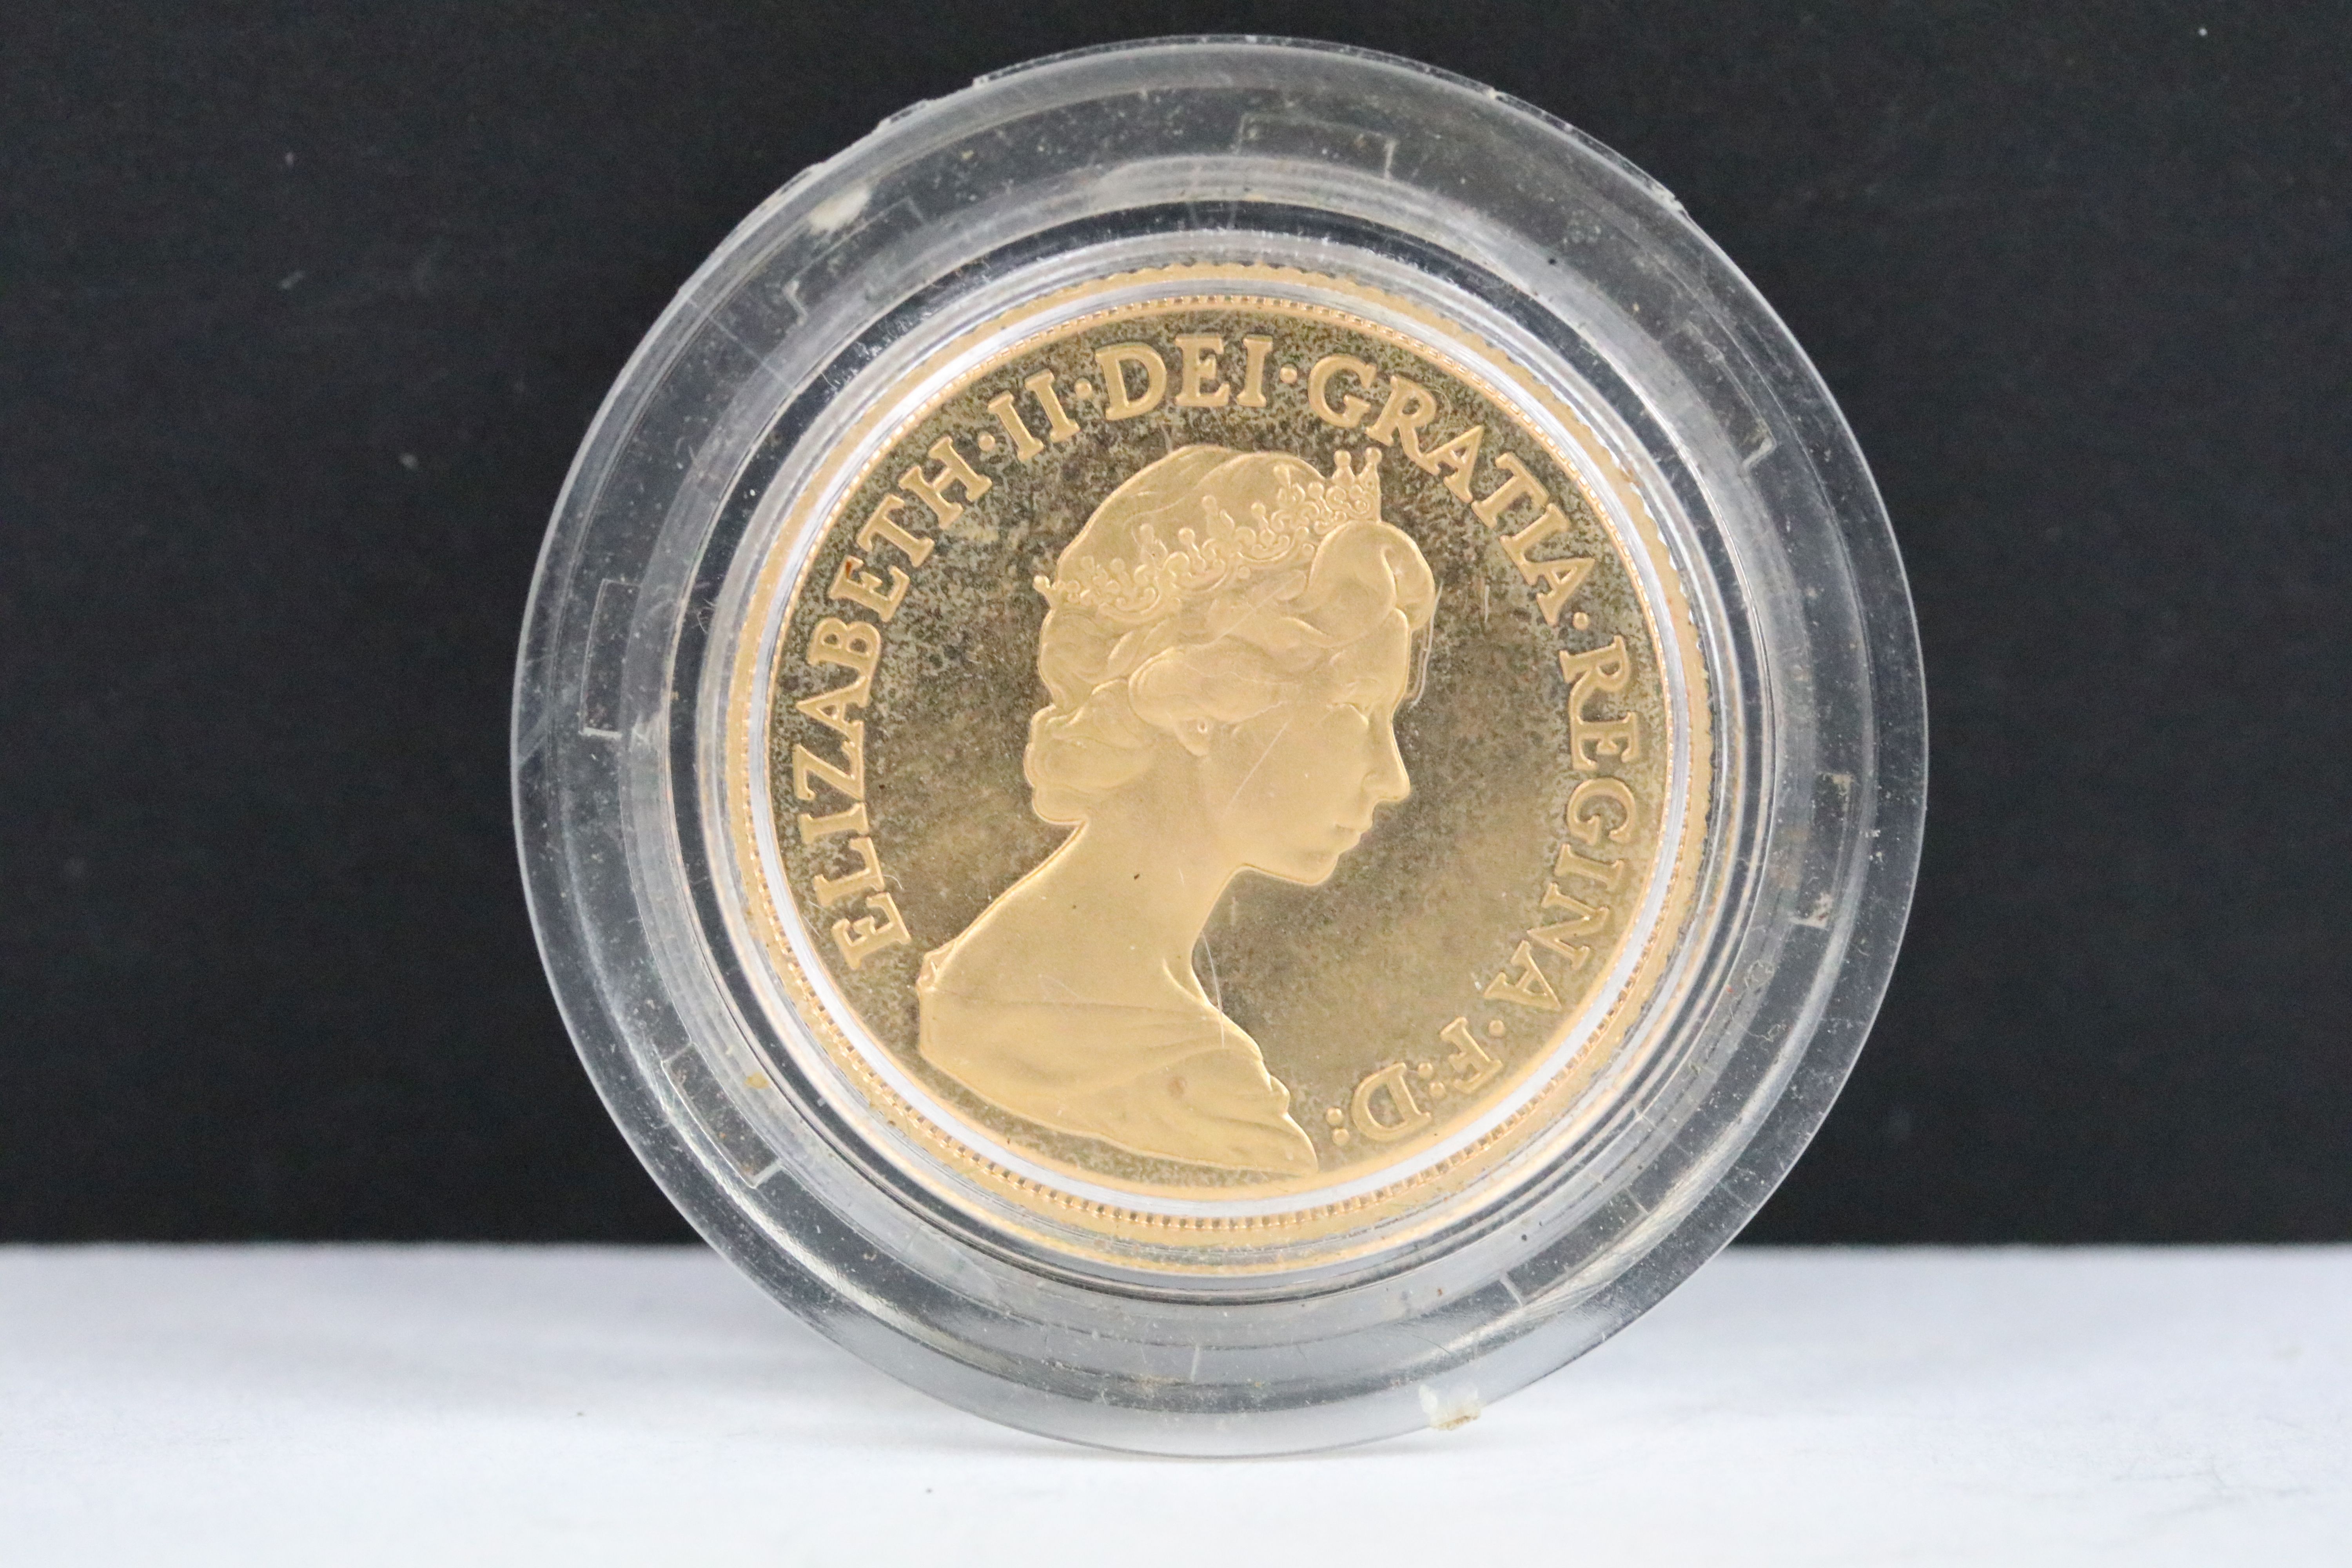 A British Queen Elizabeth II 1980 gold full sovereign coin. - Image 2 of 3